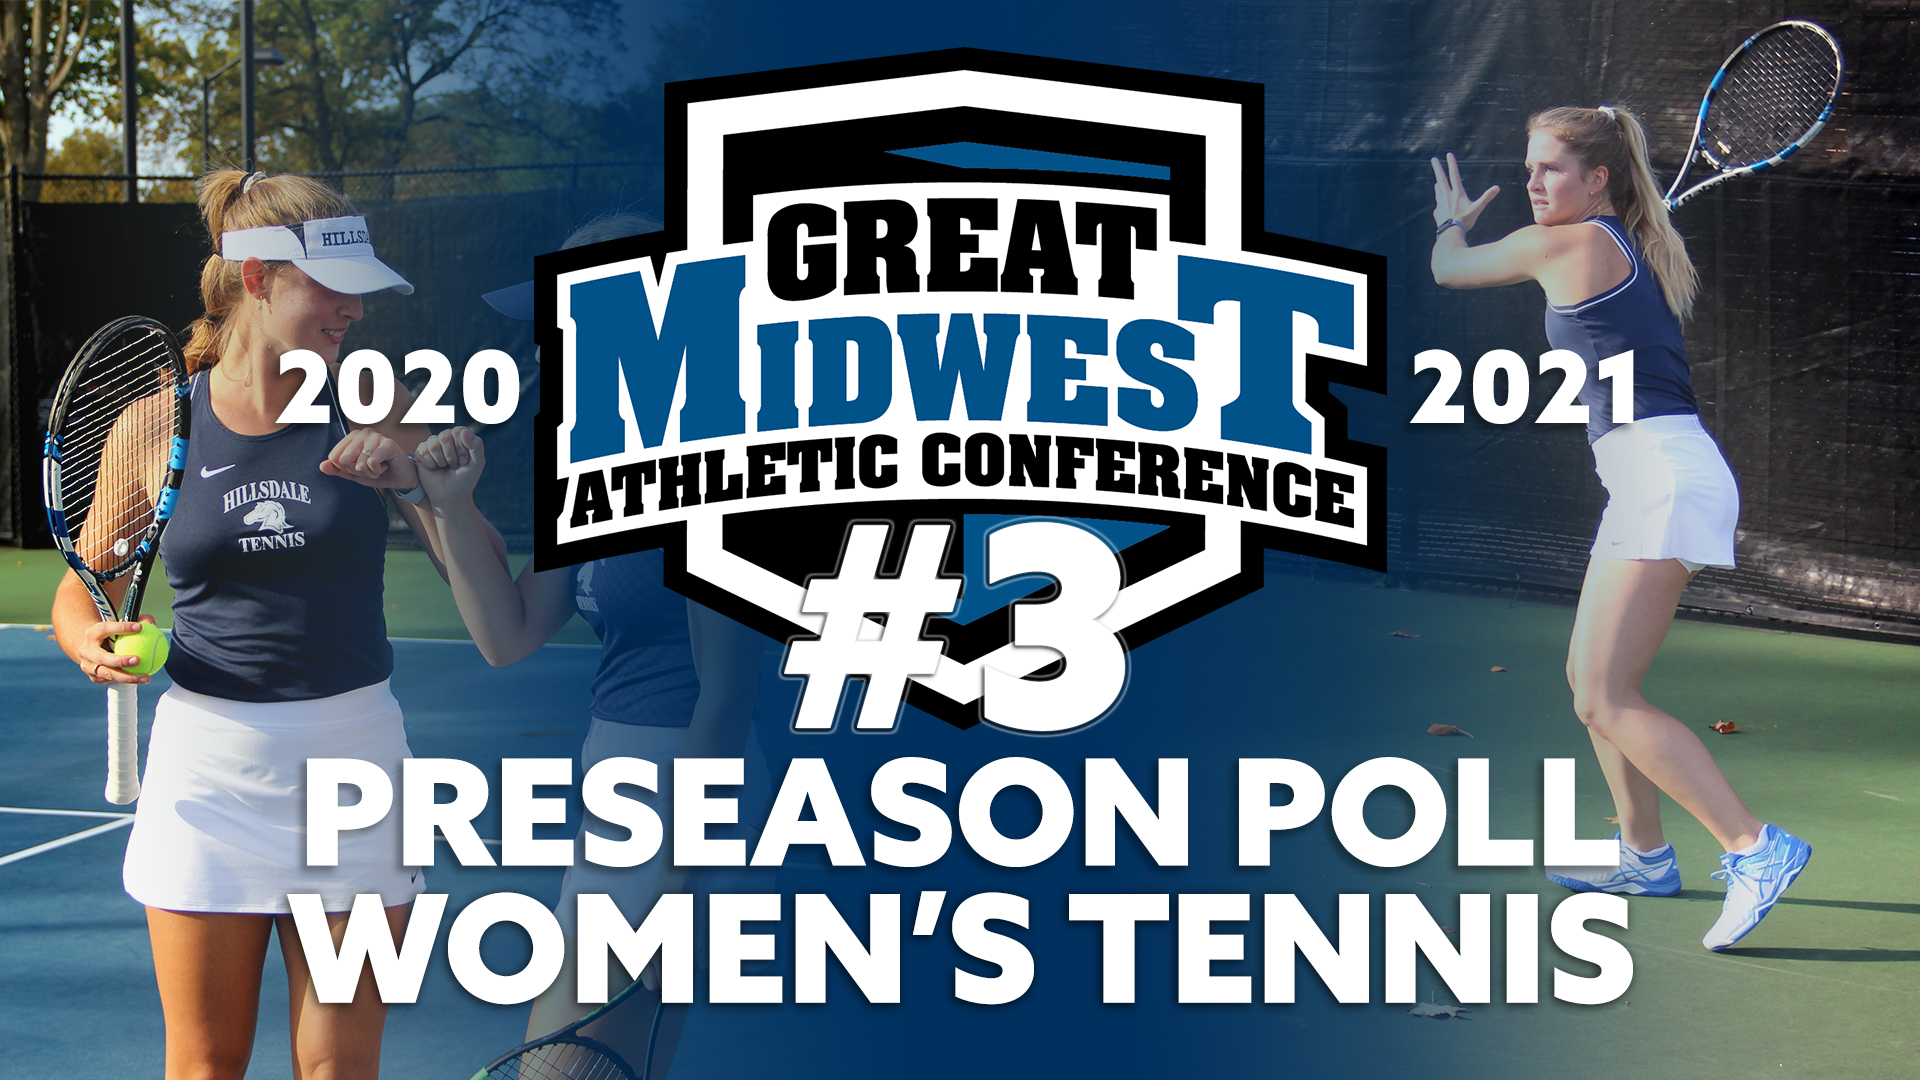 Charger women's tennis team picked to finish third in G-MAC preseason poll